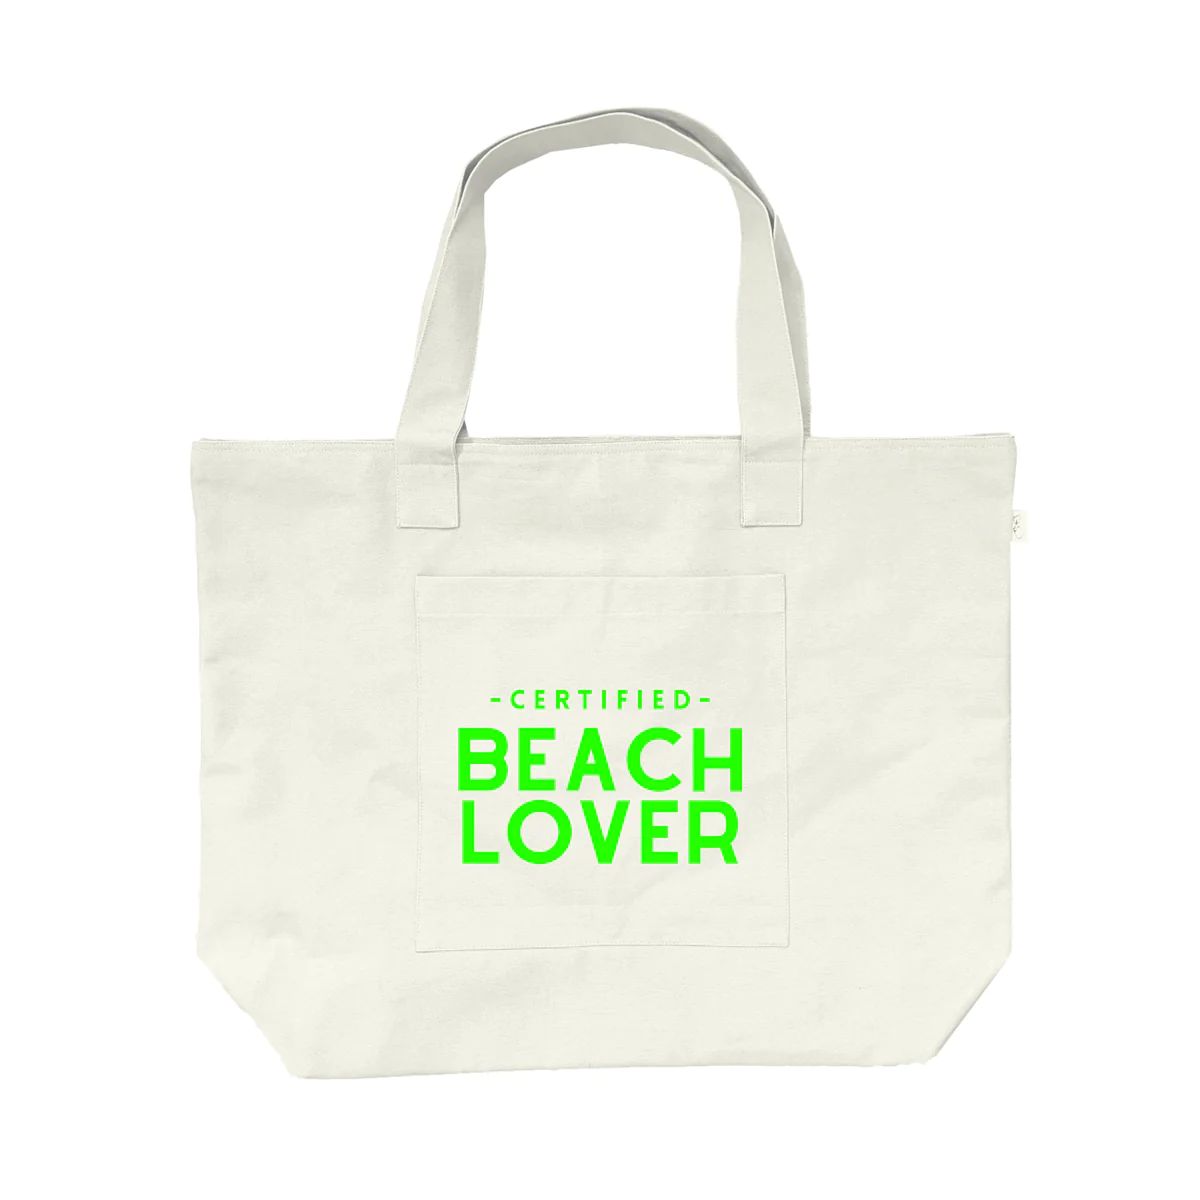 NEW! Everything Bag Natural with Neon Green Certified Beach Lover | Quilted Koala